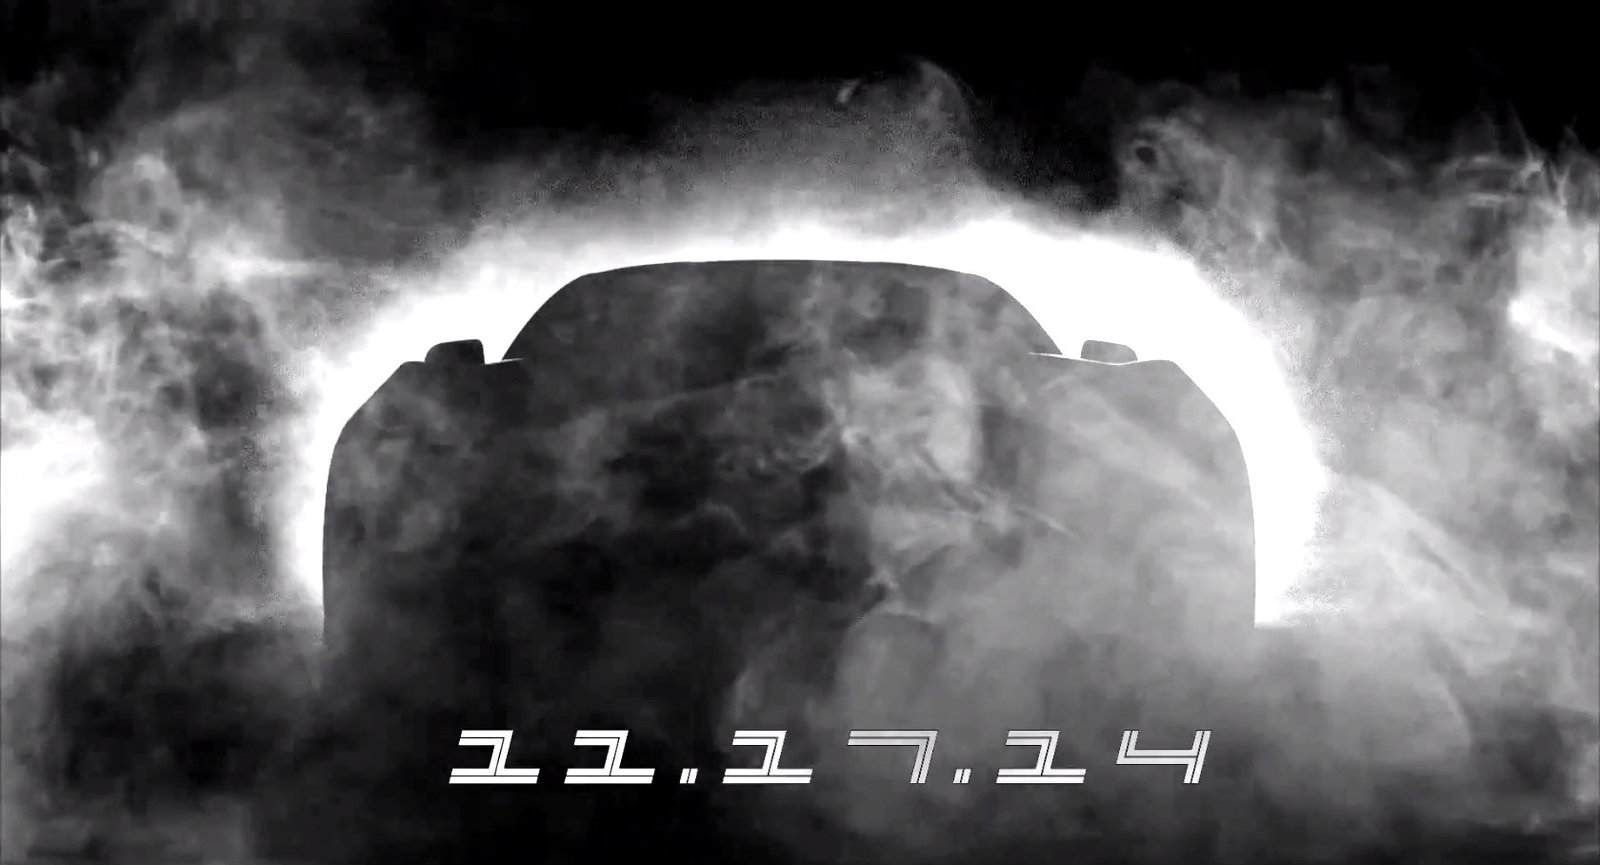 teaser-confirms-2016-shelby-mustang-gt350-new-details-emerge-video-photo-gallery-88887_1.jpg